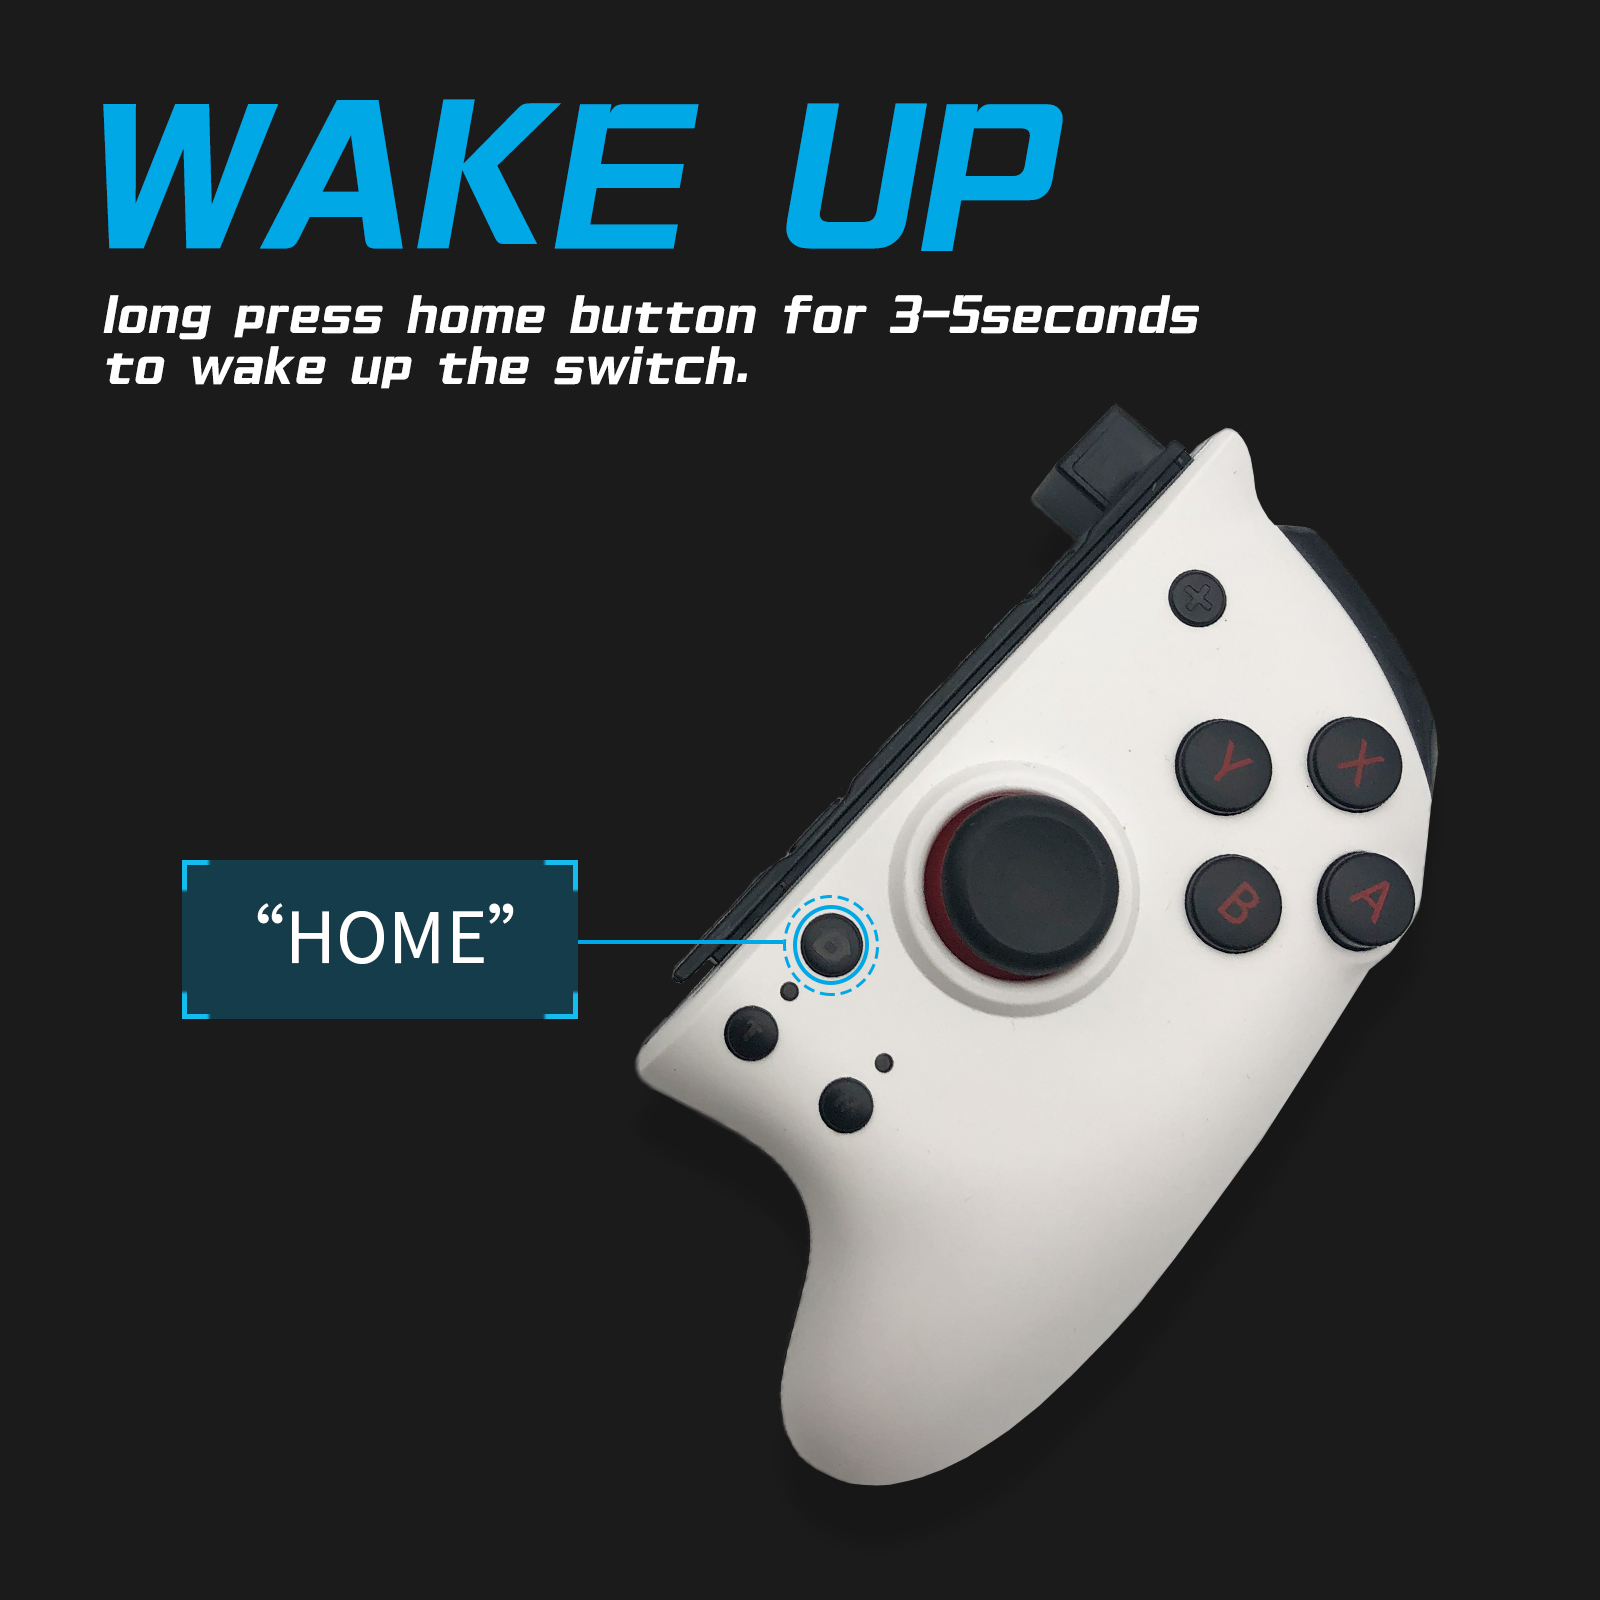 long press 'home' button for 3-5s to wake up the switch console.